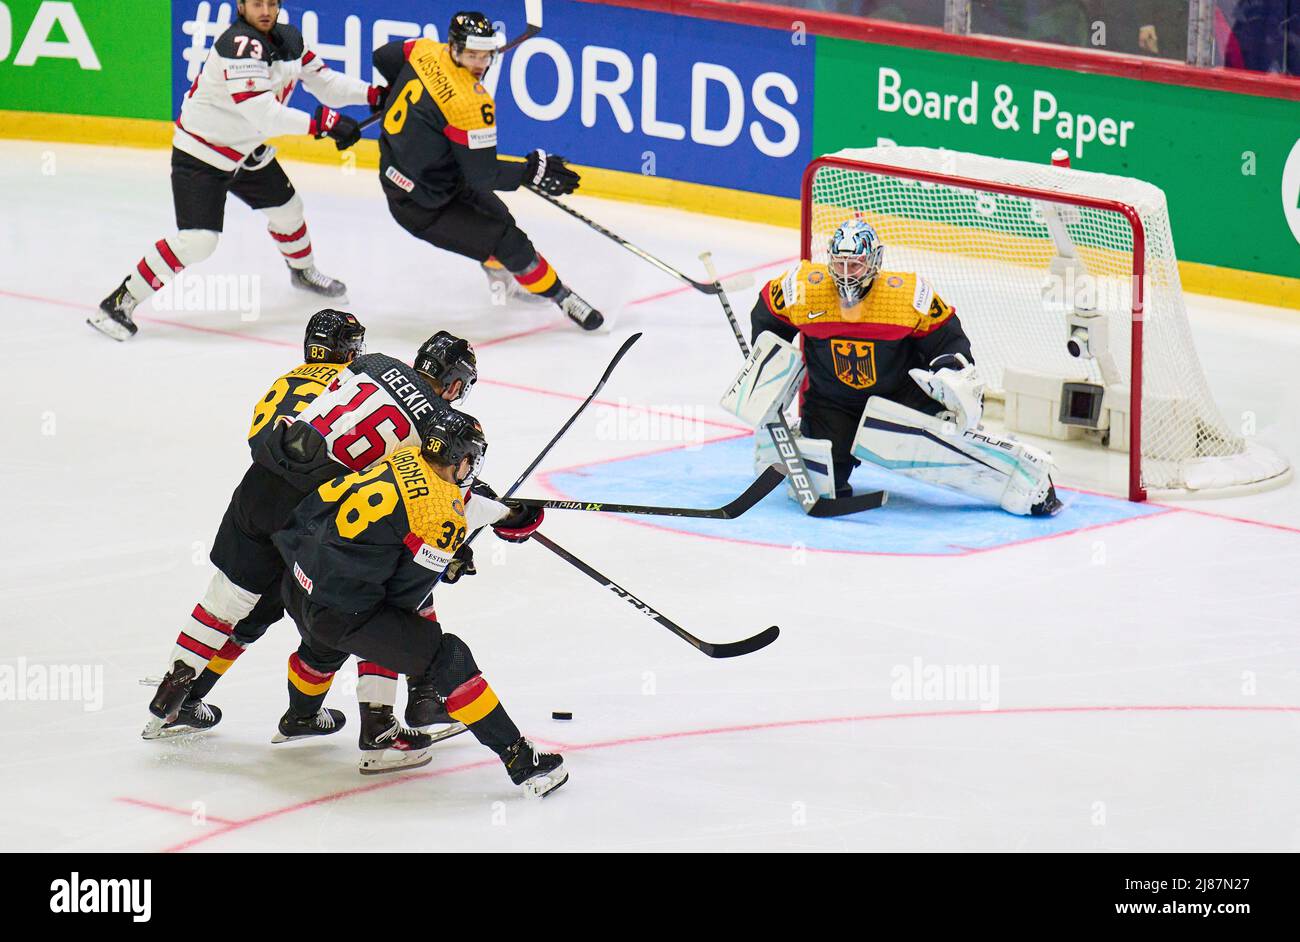 Helsinki, Finland. 13th May, 2022. Fabio Wagner Nr.38 of Germany NHL goalie Philipp GRUBAUER Goalie  Nr.30 of Germany compete, fight for the puck against, Morgan Geekie Nr. 16 of Canada   in the match GERMANY - CANADA  IIHF ICE HOCKEY WORLD CHAMPIONSHIP Group B  in Helsinki, Finland, May 13, 2022,  Season 2021/2022 © Peter Schatz / Alamy Live News Credit: Peter Schatz/Alamy Live News Stock Photo